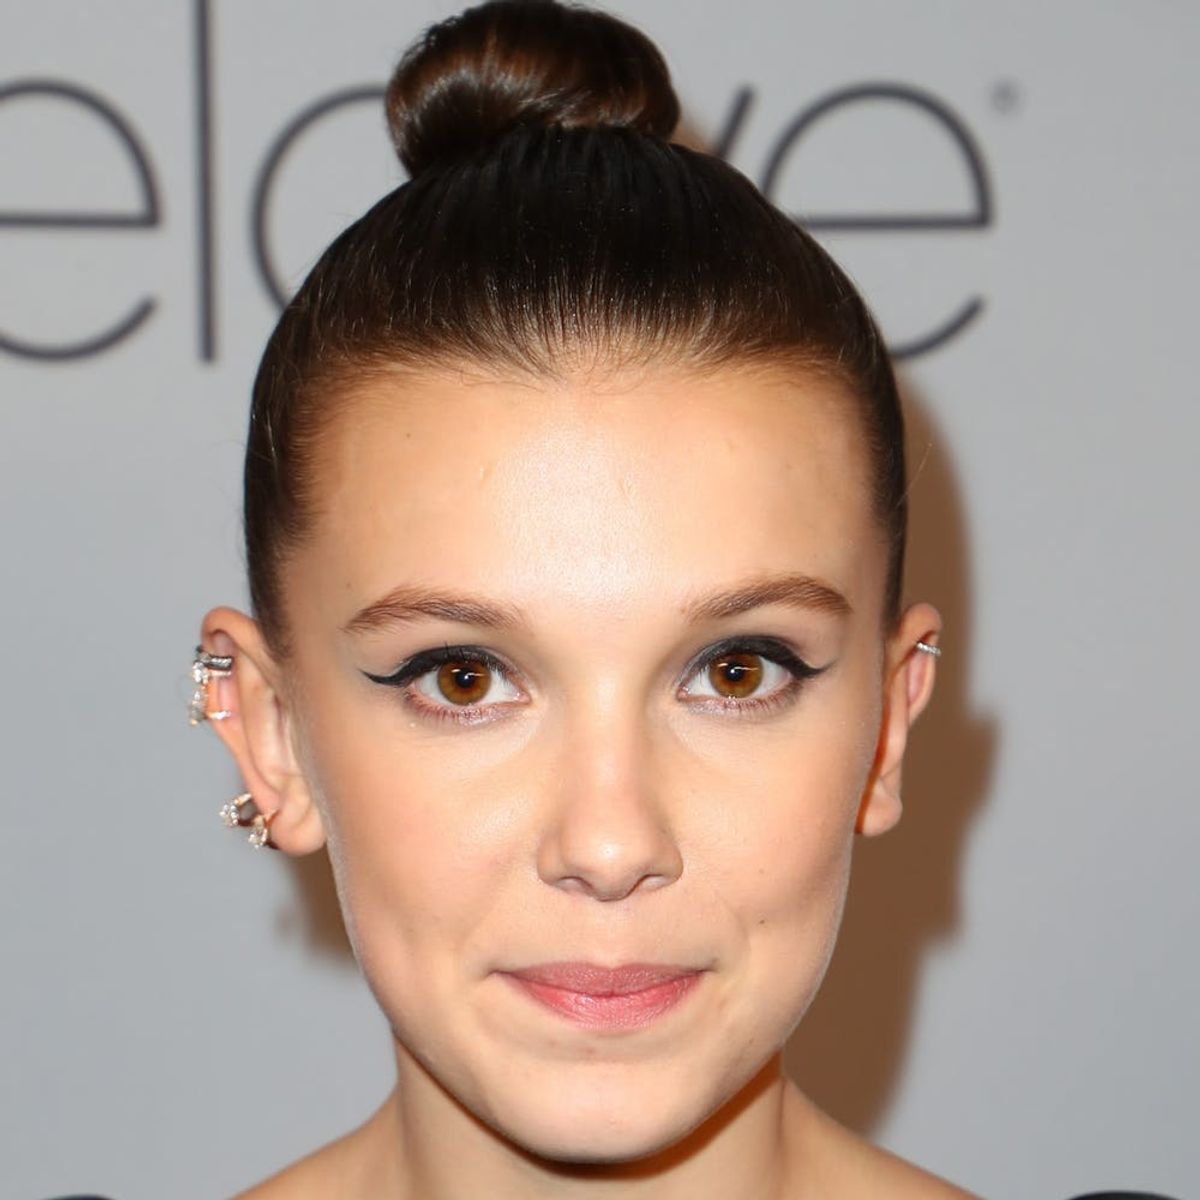 Millie Bobby Brown Says Shaving Her Head Was the Most Empowering Moment of Her Life